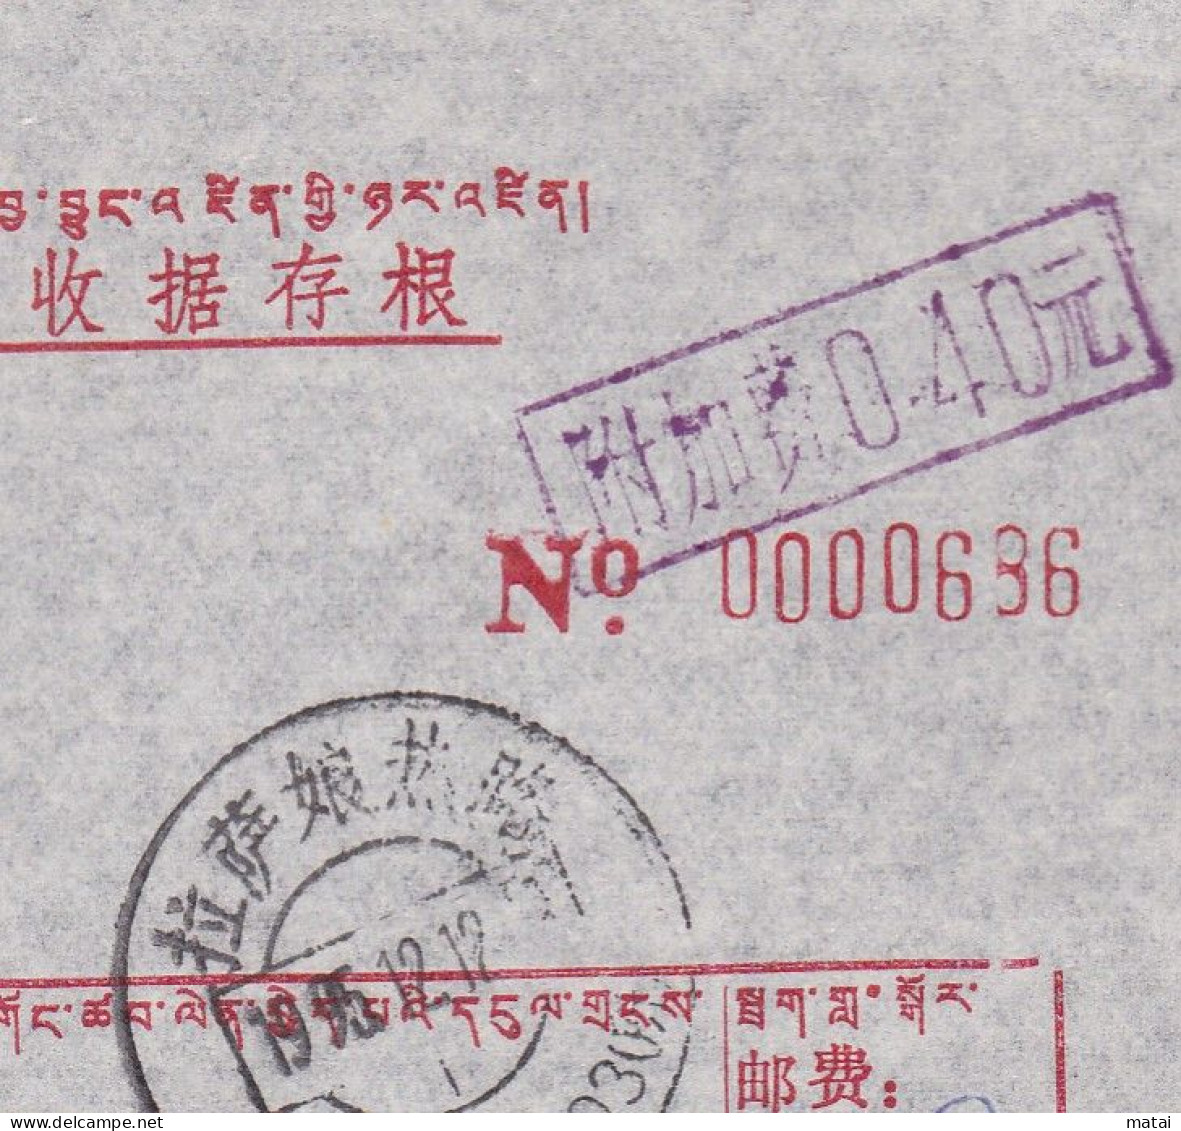 CHINA Tibet Lhasa 850003 Domestic Receipt Stub WITH ADDED CHARGE LABEL (ACL)  0.40 YUAN Ethnic Minority Script RARE! - Other & Unclassified